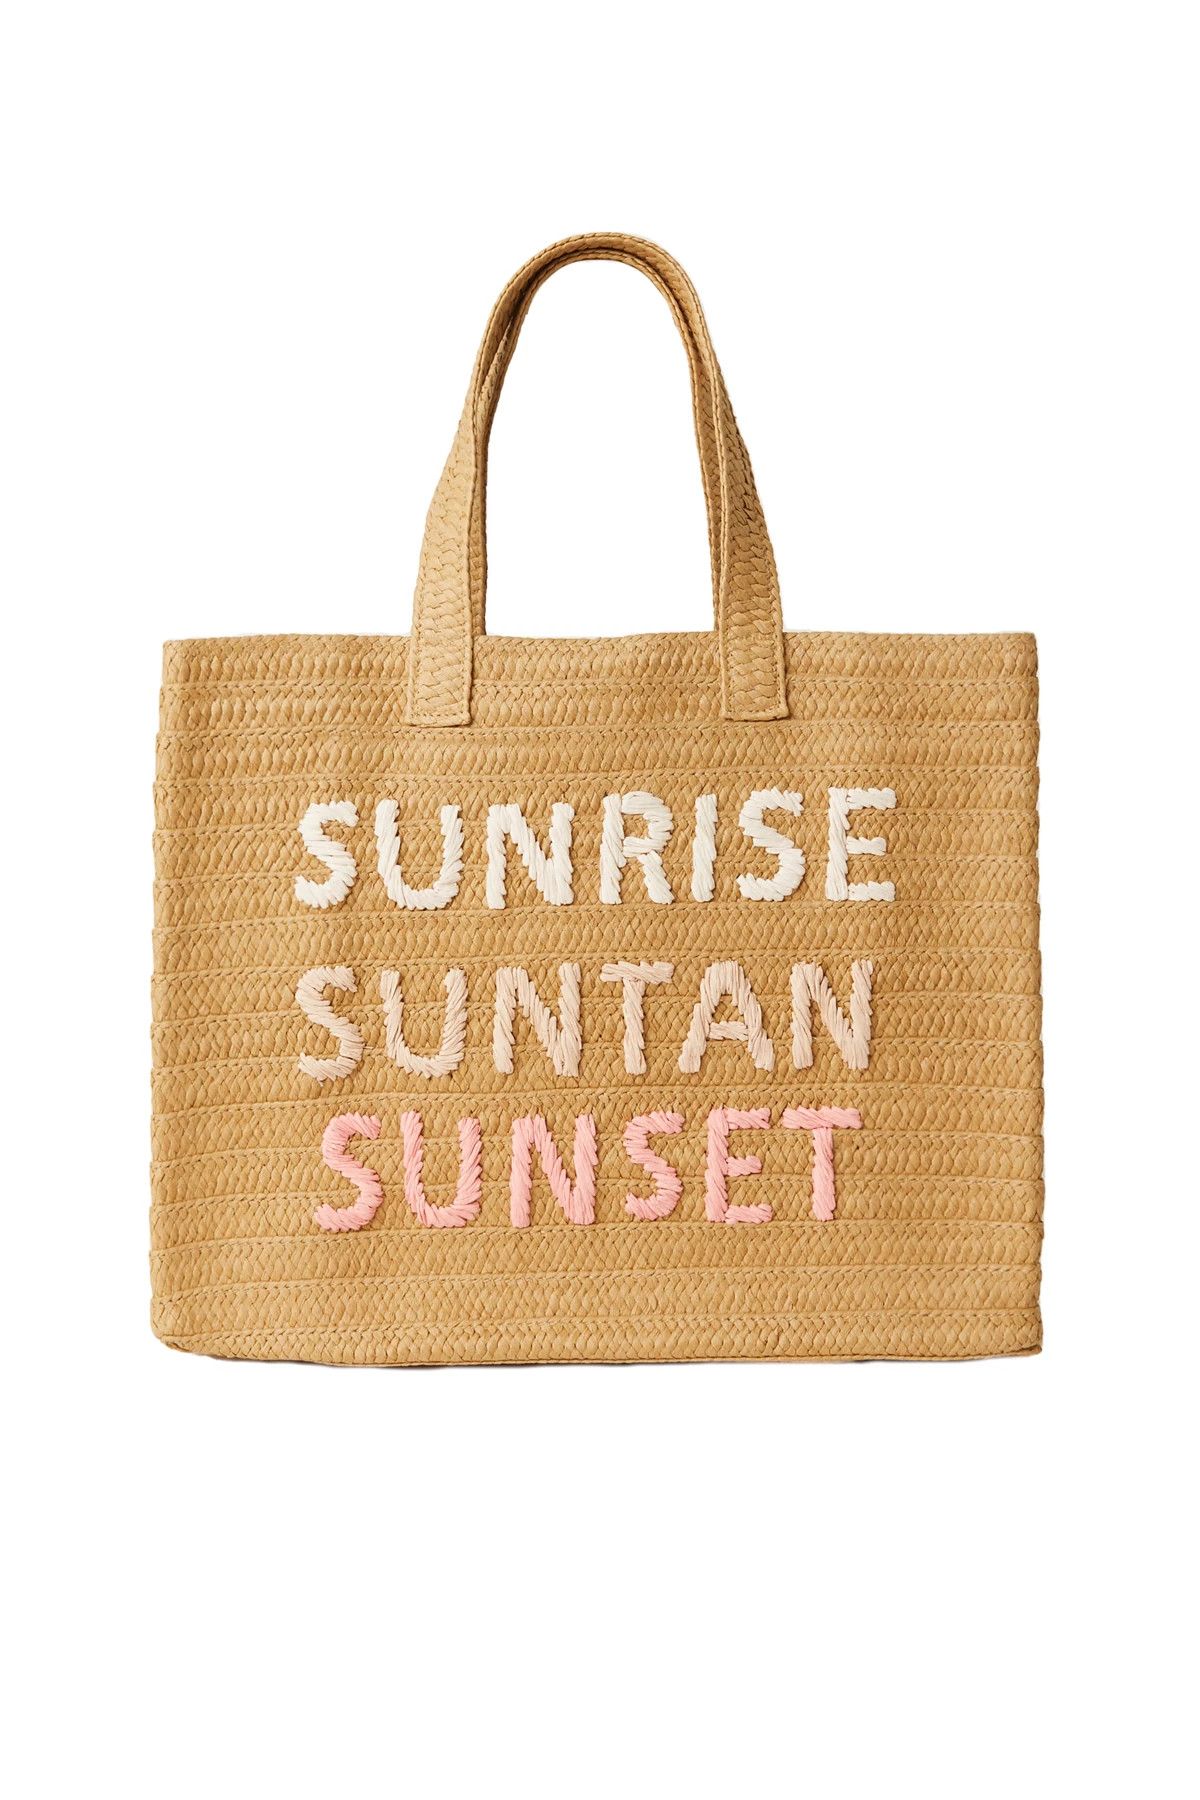 Sunrise Sunset Tote | Everything But Water